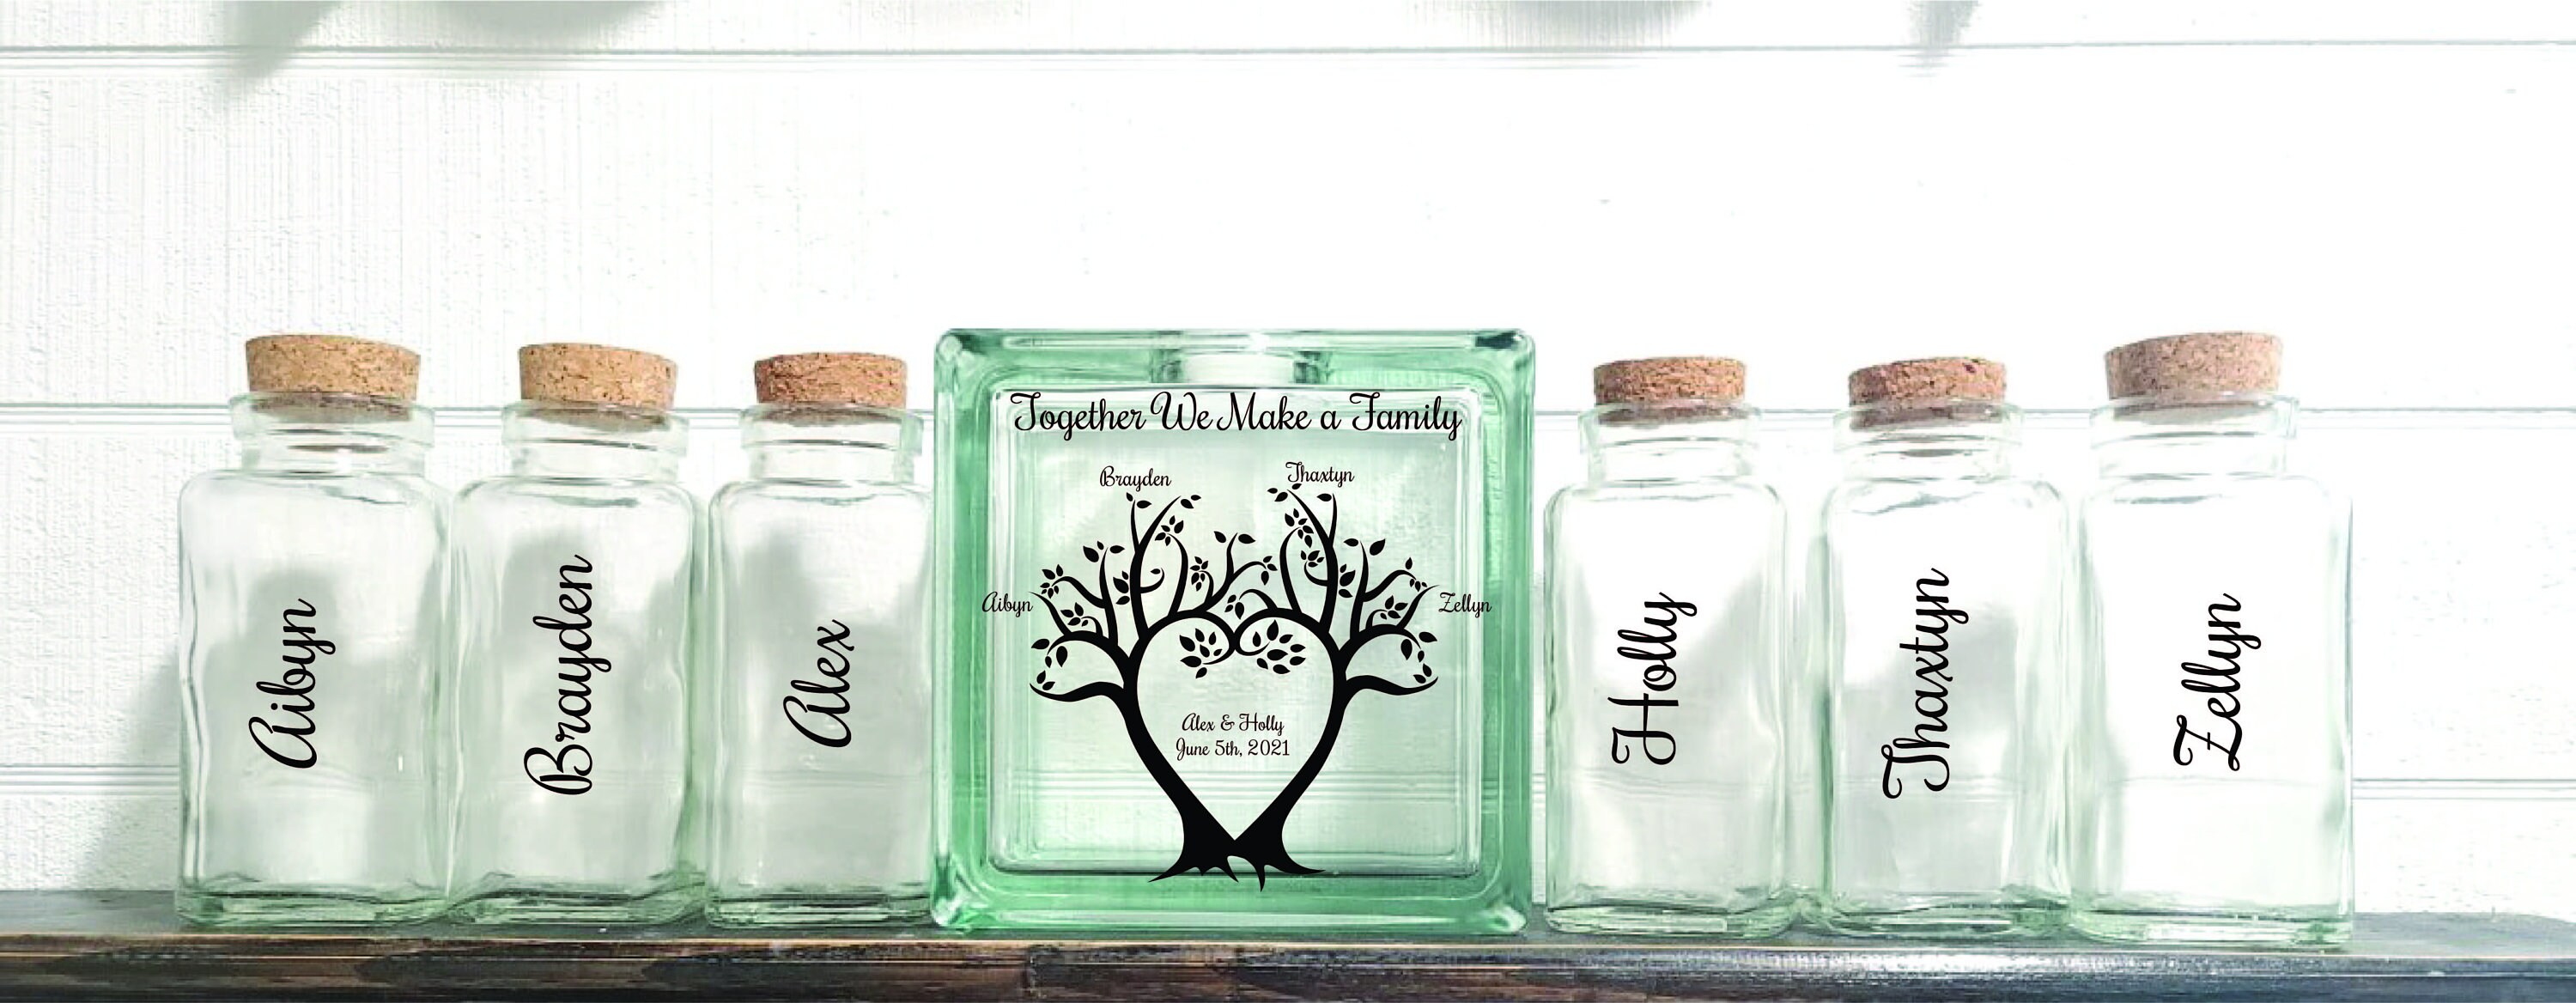 Wedding Unity Sand Ceremony Set Blended Family Together We Make A Family-Blended Family-Tree-Tpuwus2075x5